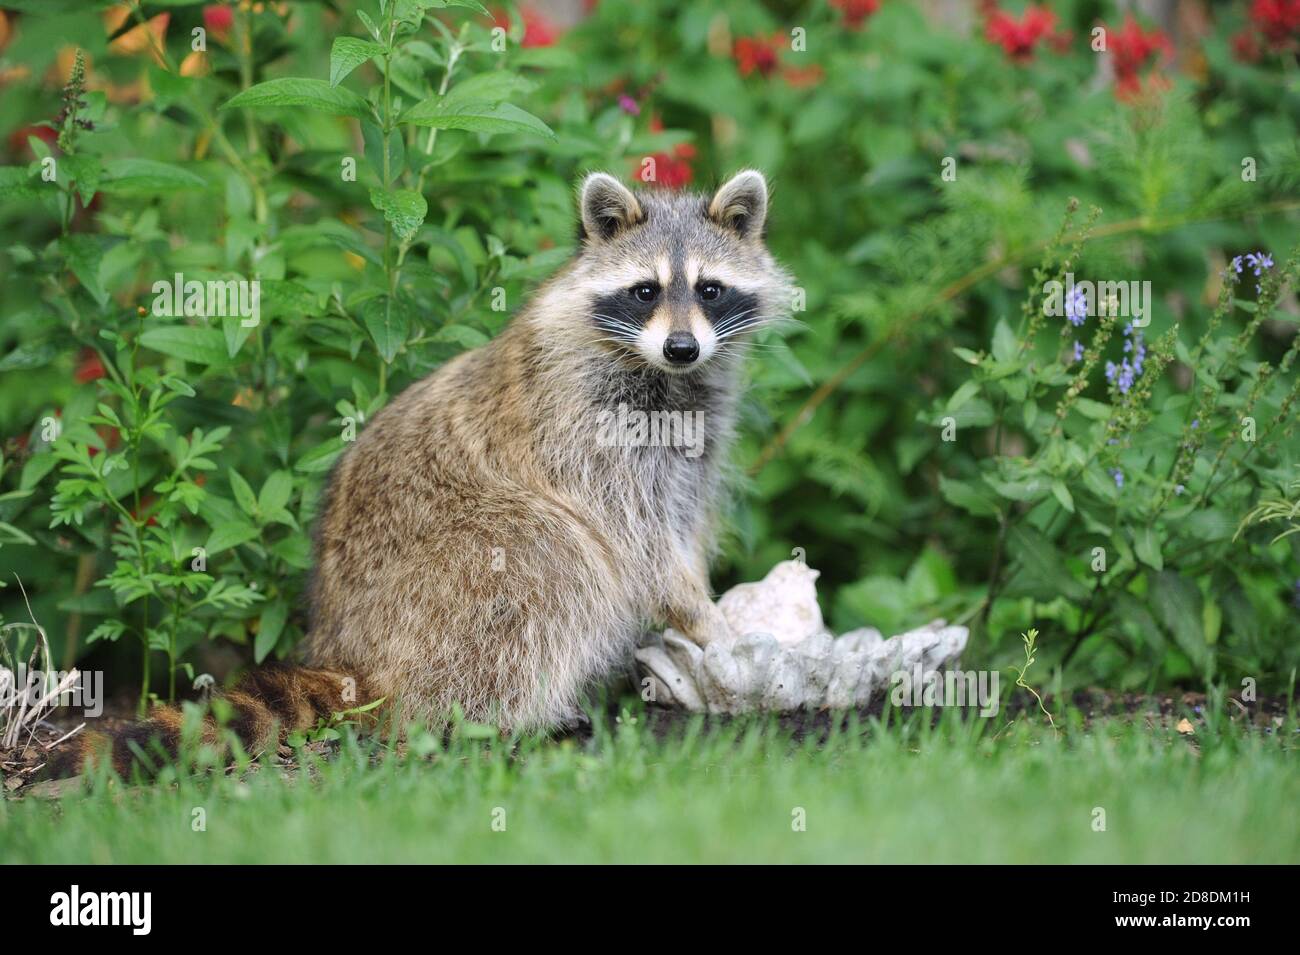 A raccoon sitting and watching in a garden Stock Photo